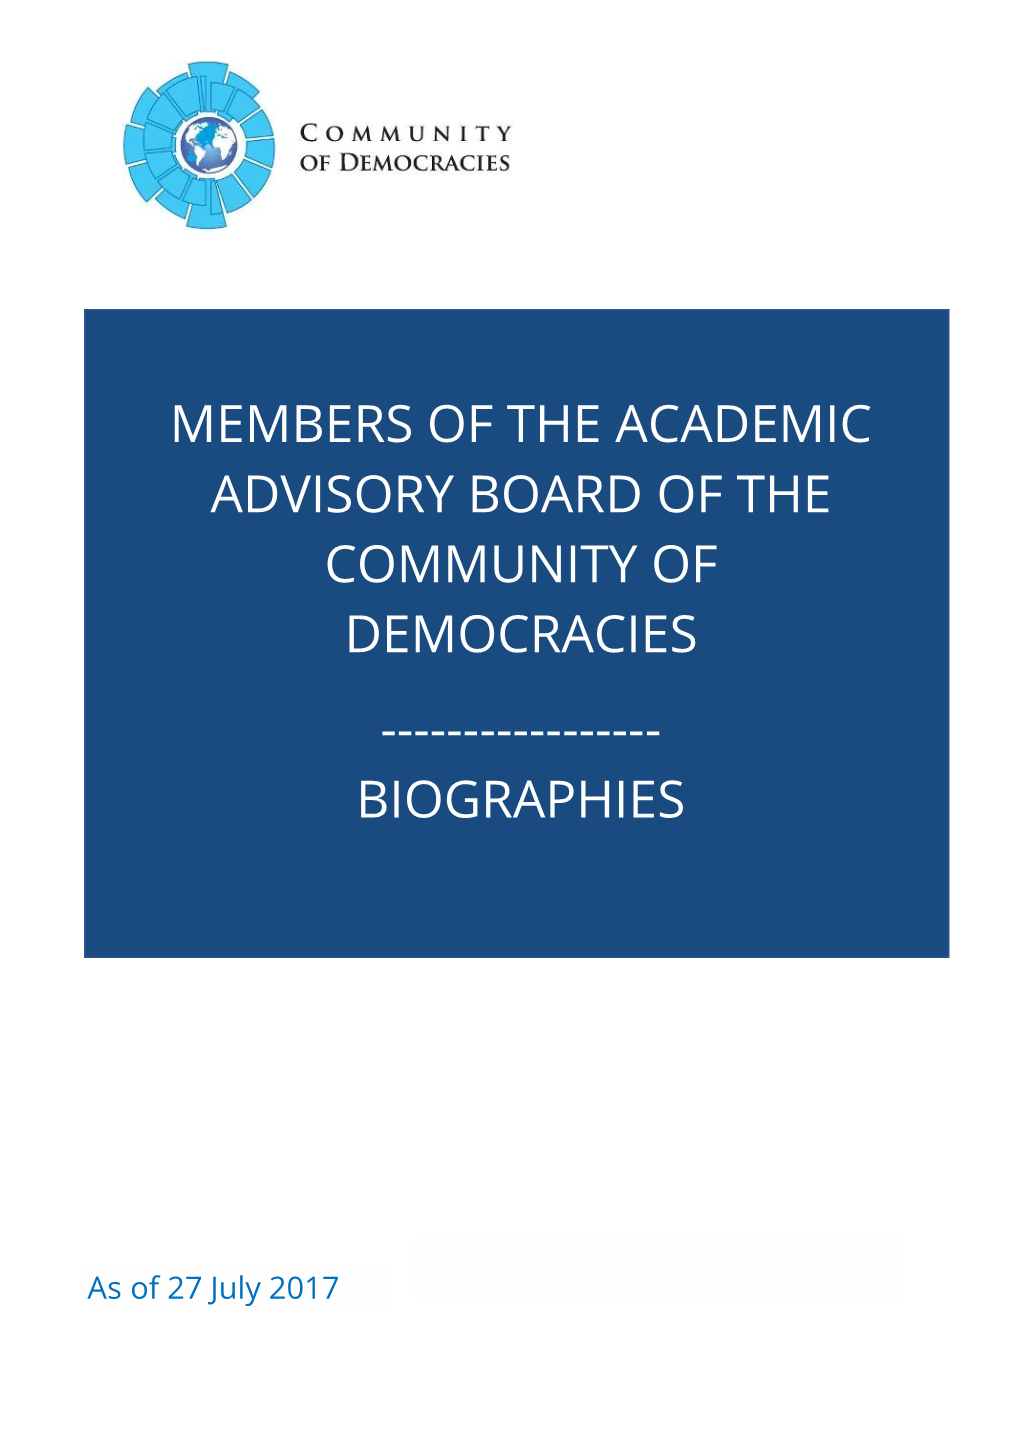 Members of the Academic Advisory Board of the Community of Democracies